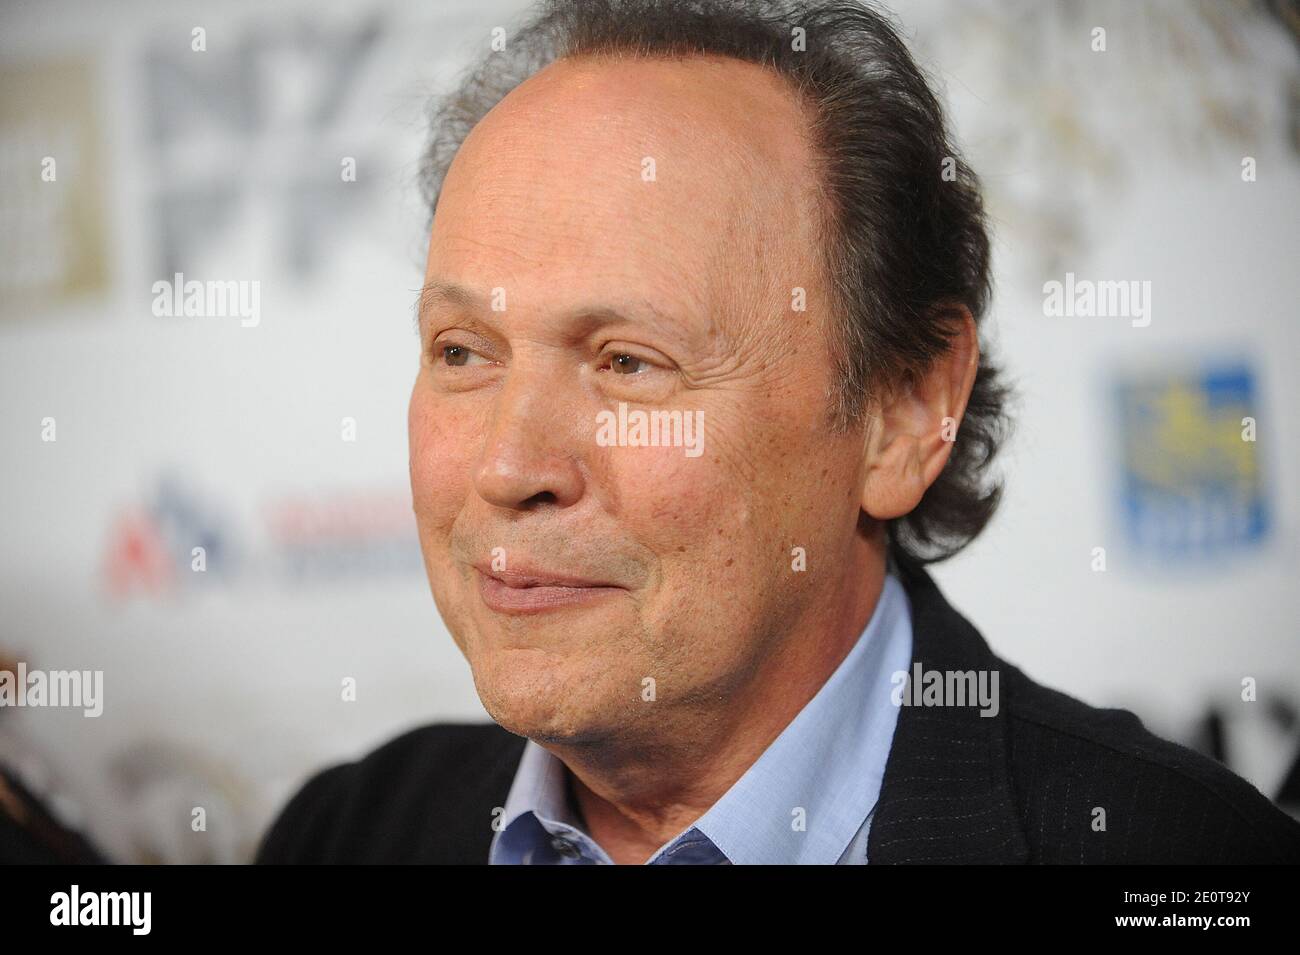 Billy Crystal attending 'The Princess Bride' screening during the 2012 New York Film Festival at Alice Tully Hall in New York City, NY, USA, on October 0, 2012. Photo by Brad Barket/ABACAPRESS.COM Stock Photo